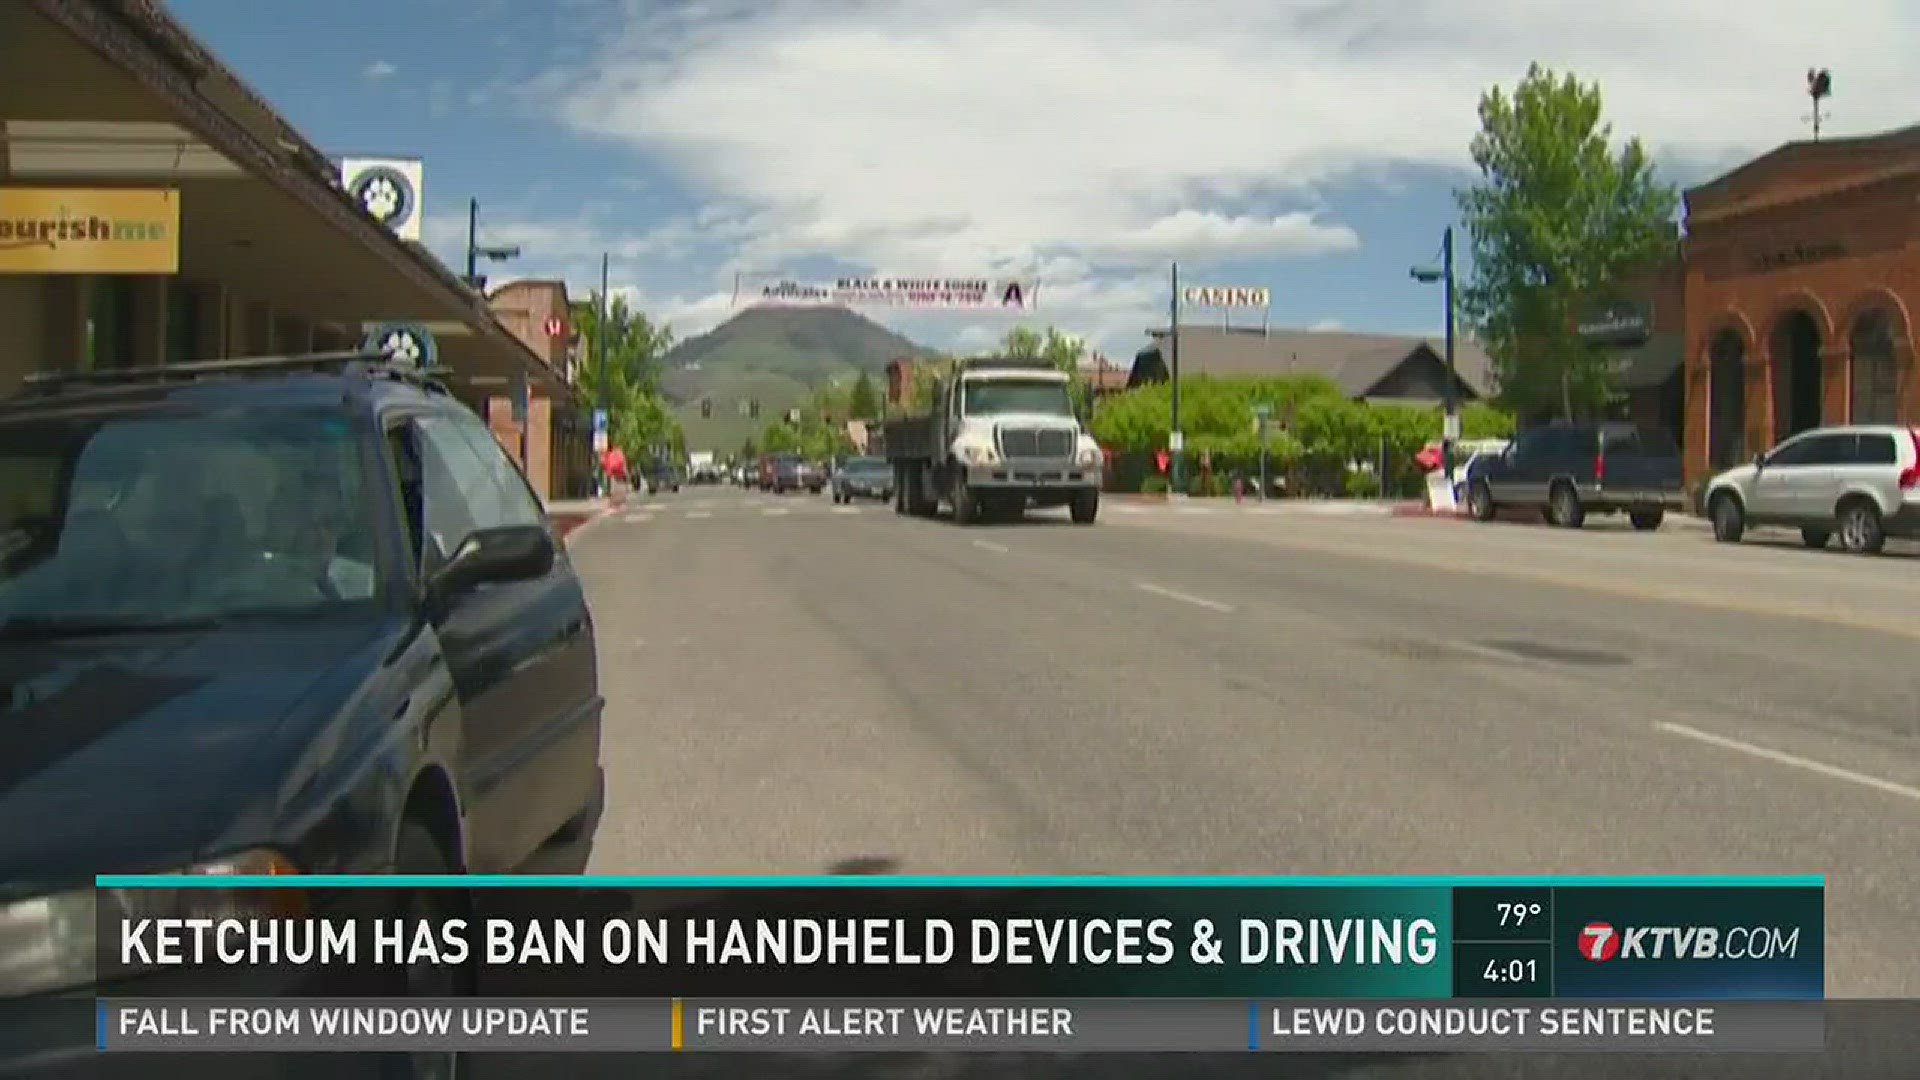 Ketchum bans all handheld devices and driving